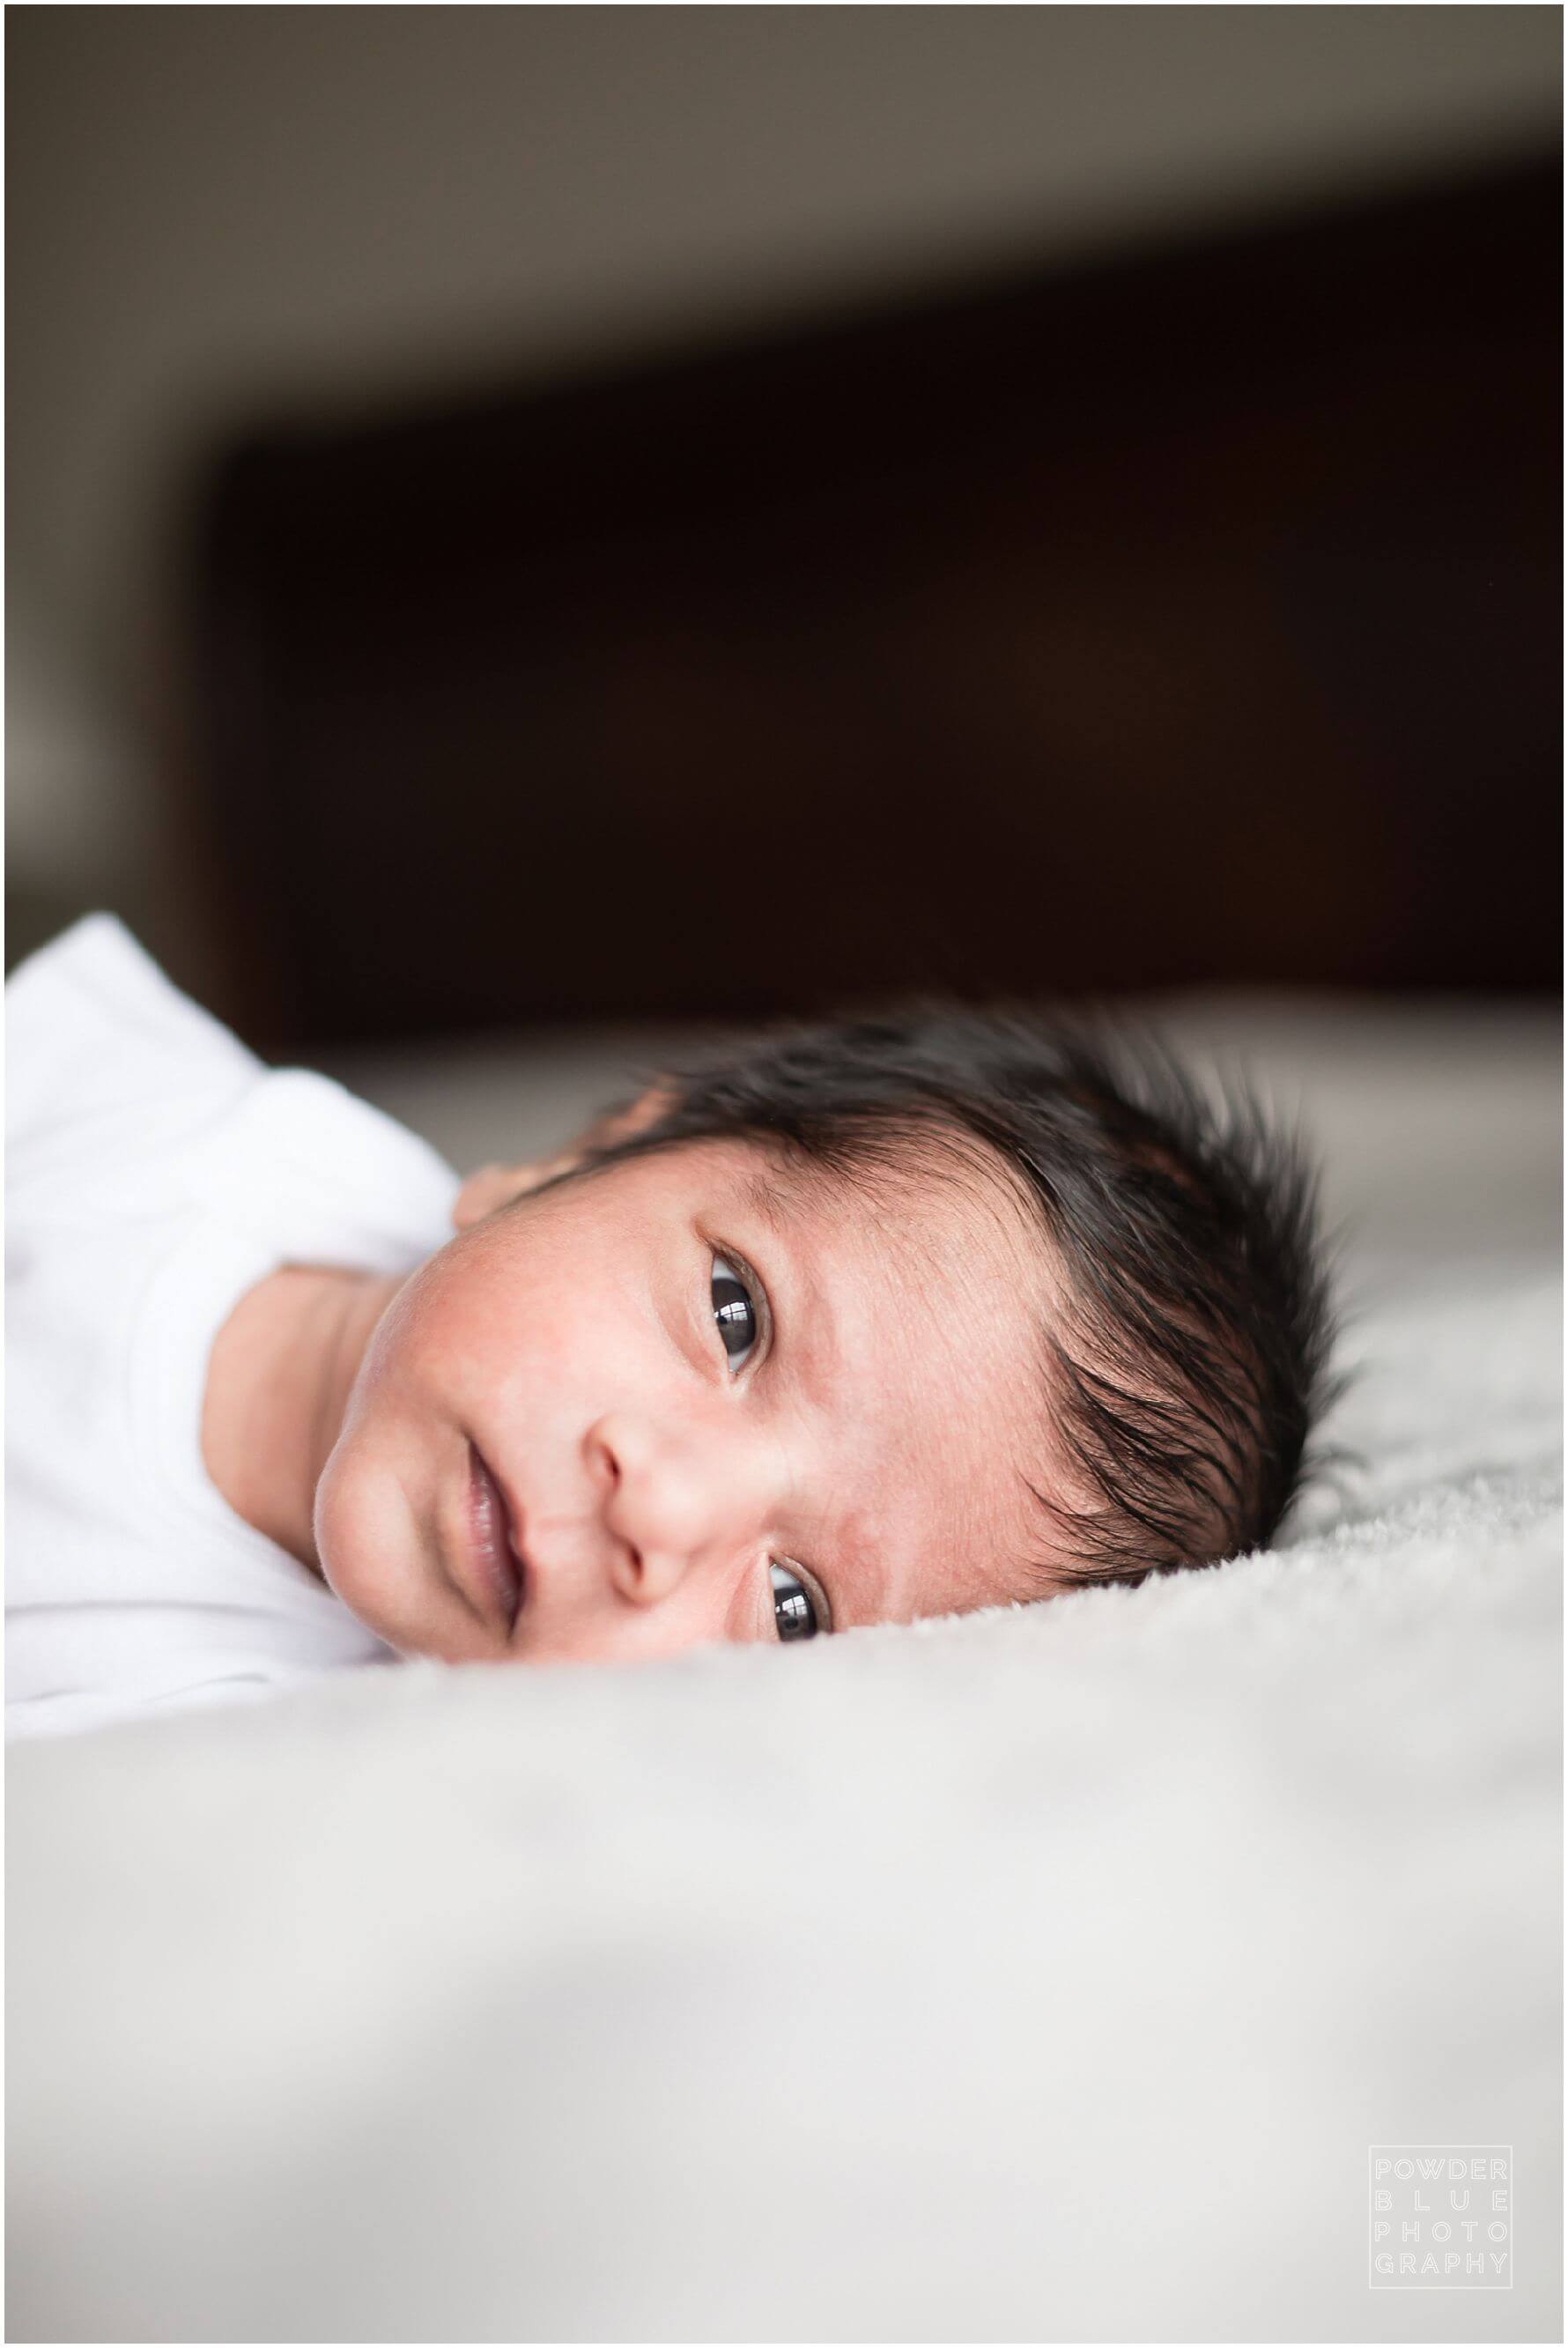 pittsburgh newborn photographer lifestyle photography session. newborn baby in black & white and color portraits on a bed in a home.